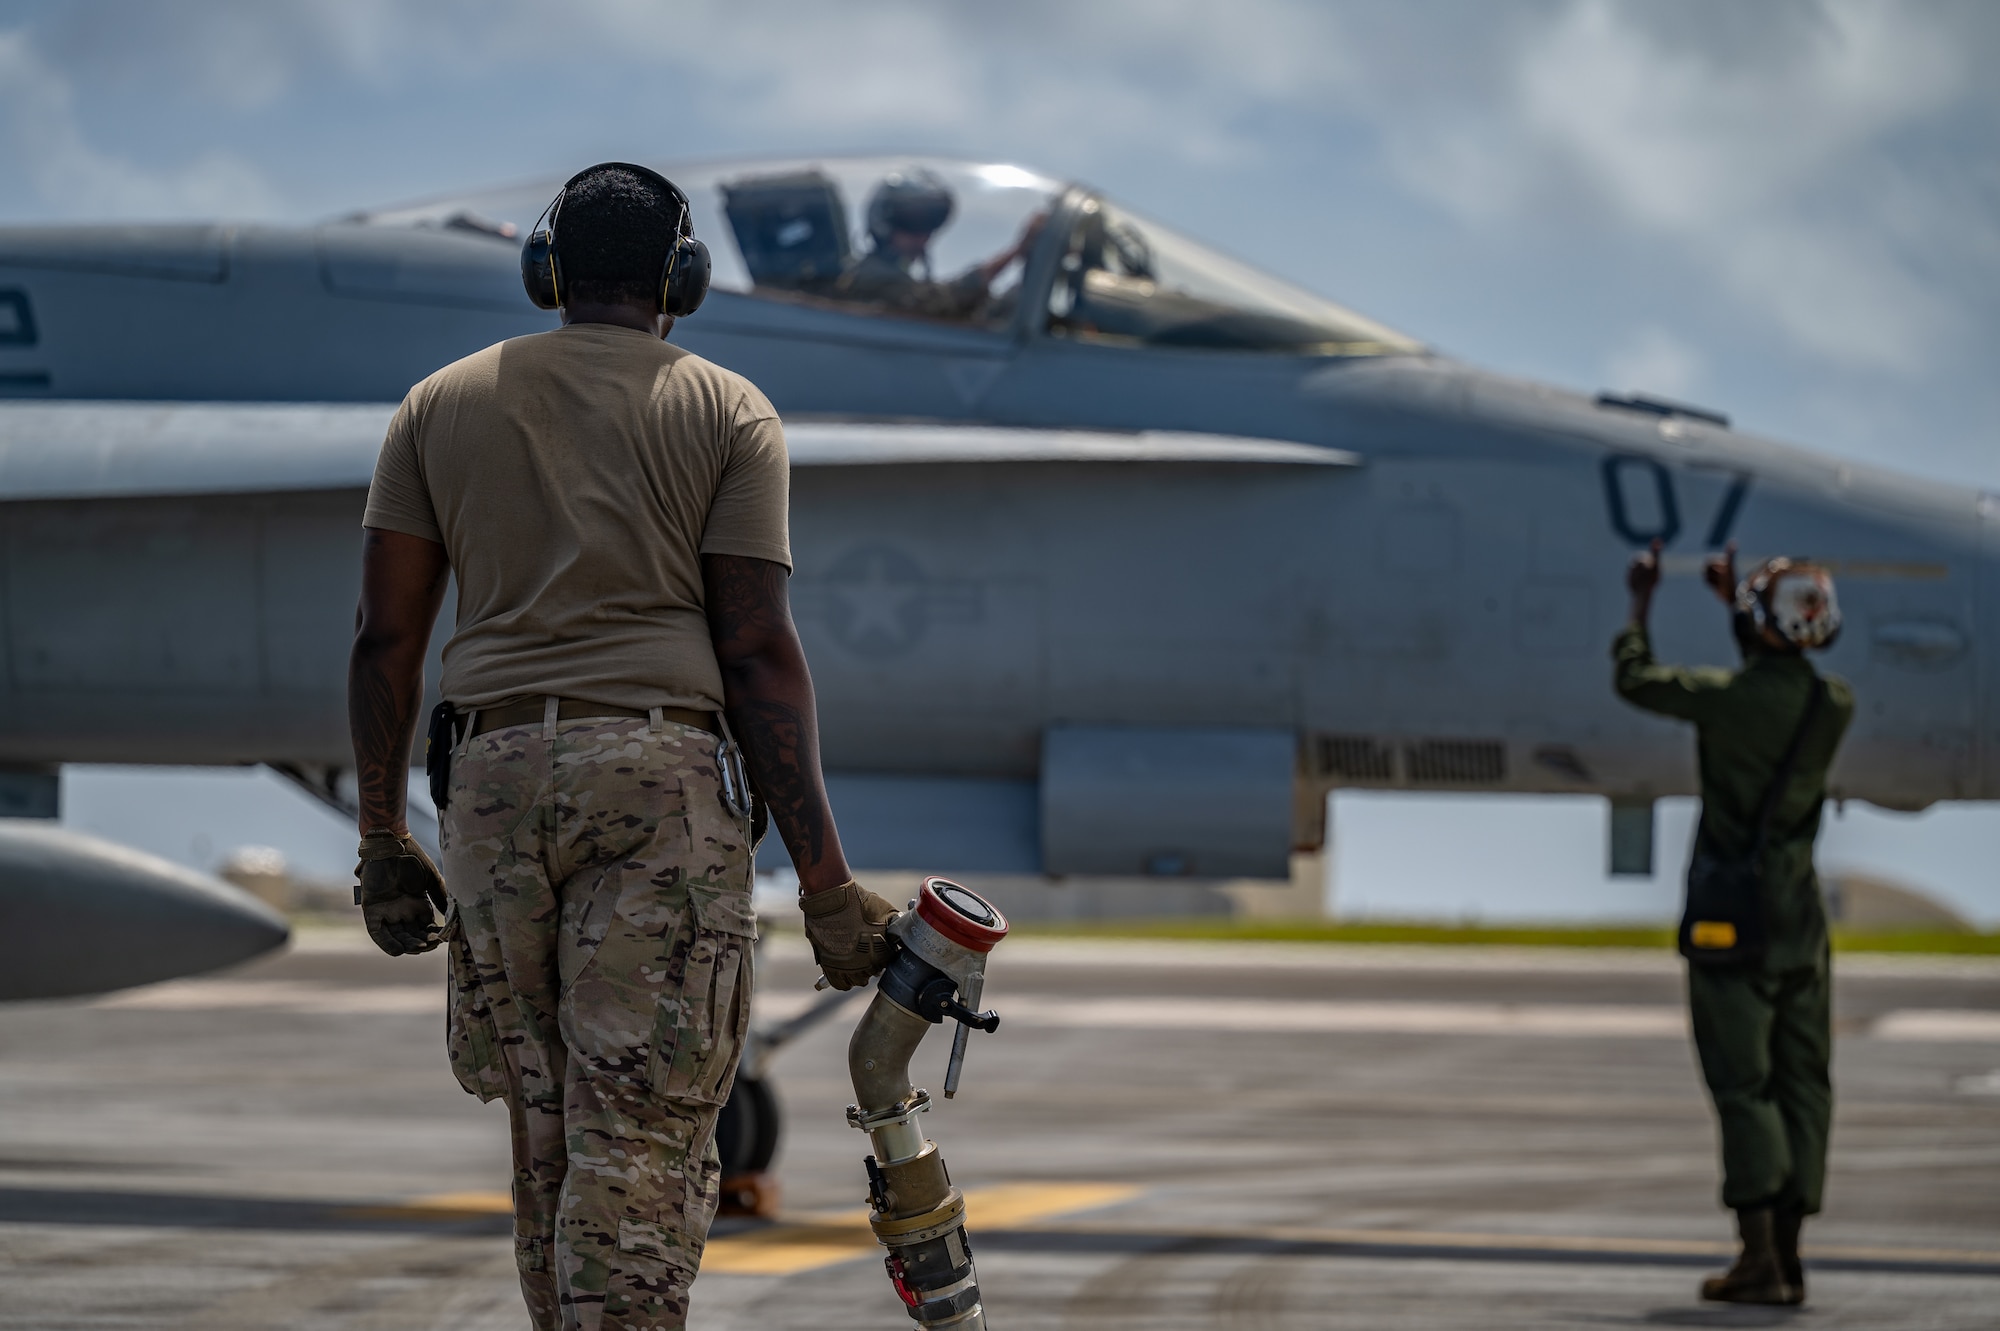 A 40th Airlift Squadron loadmaster prepares to attach a fuel hose to a Marine Fighter F/A-18C Hornet at Andersen Air Force Base, Guam, Feb. 14, 2022.